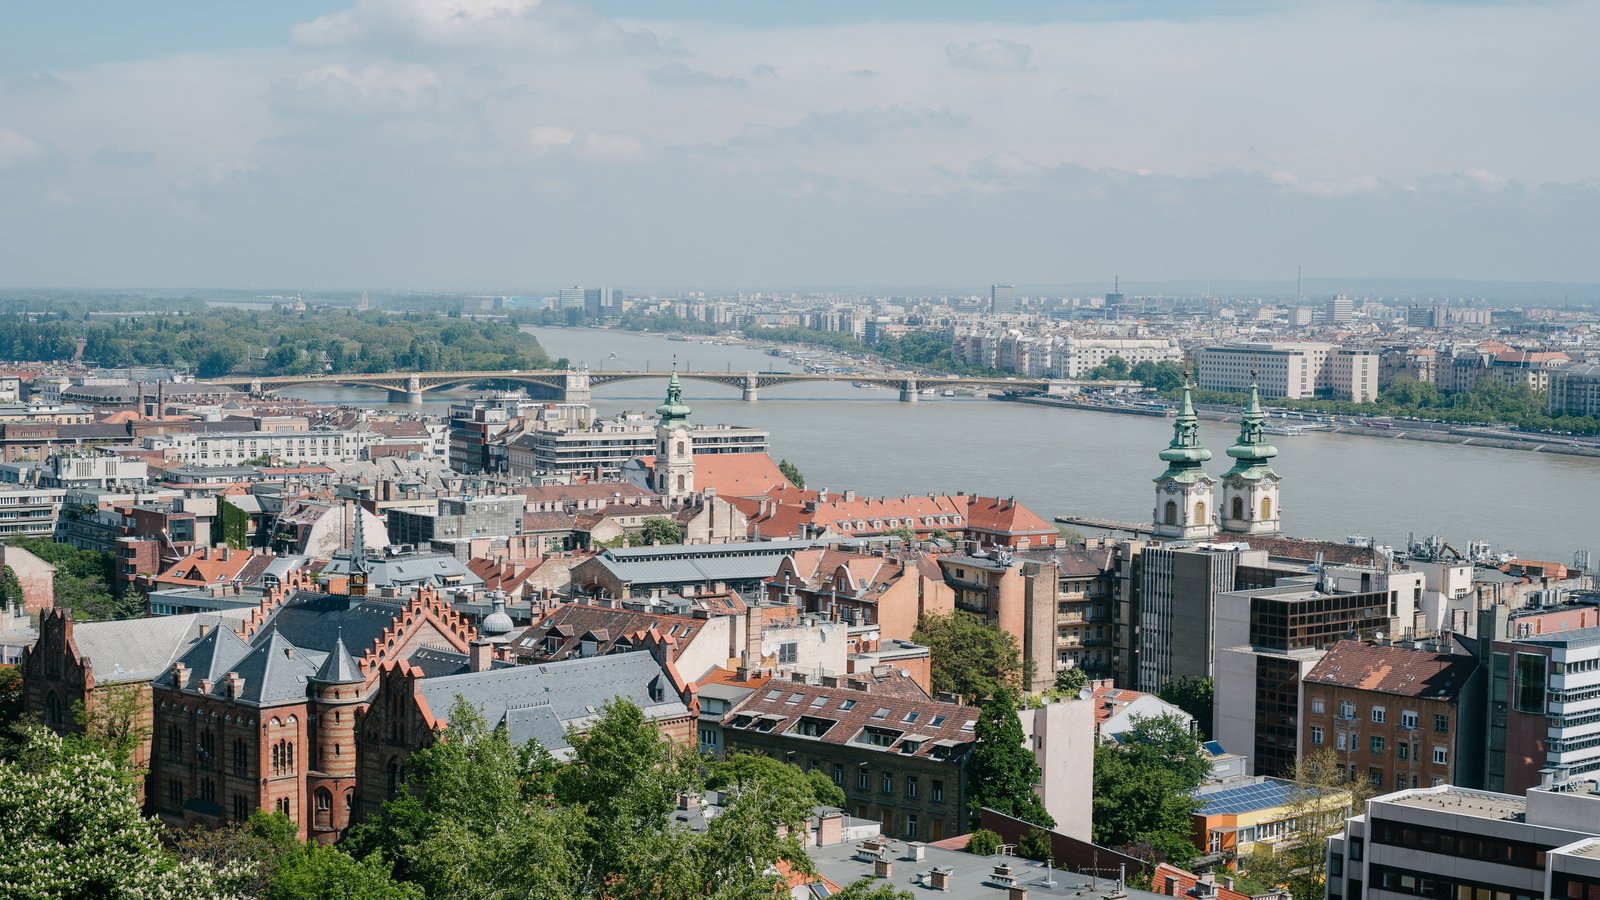 <p>Hungary is very affordable in terms of accommodation, food, and transportation. Opt for the efficient and affordable public transport in Budapest, eat at local markets, learn about history and culture with free city walking tours, and stay in hostels with a furnished kitchen. </p>    <p>A <a href="https://www.budgetyourtrip.com/hungary/budapest" rel="noopener">one-week trip to Budapest</a> for two people, on average, costs $1,329.</p>    <p>Cheapest time to visit – January-February</p>